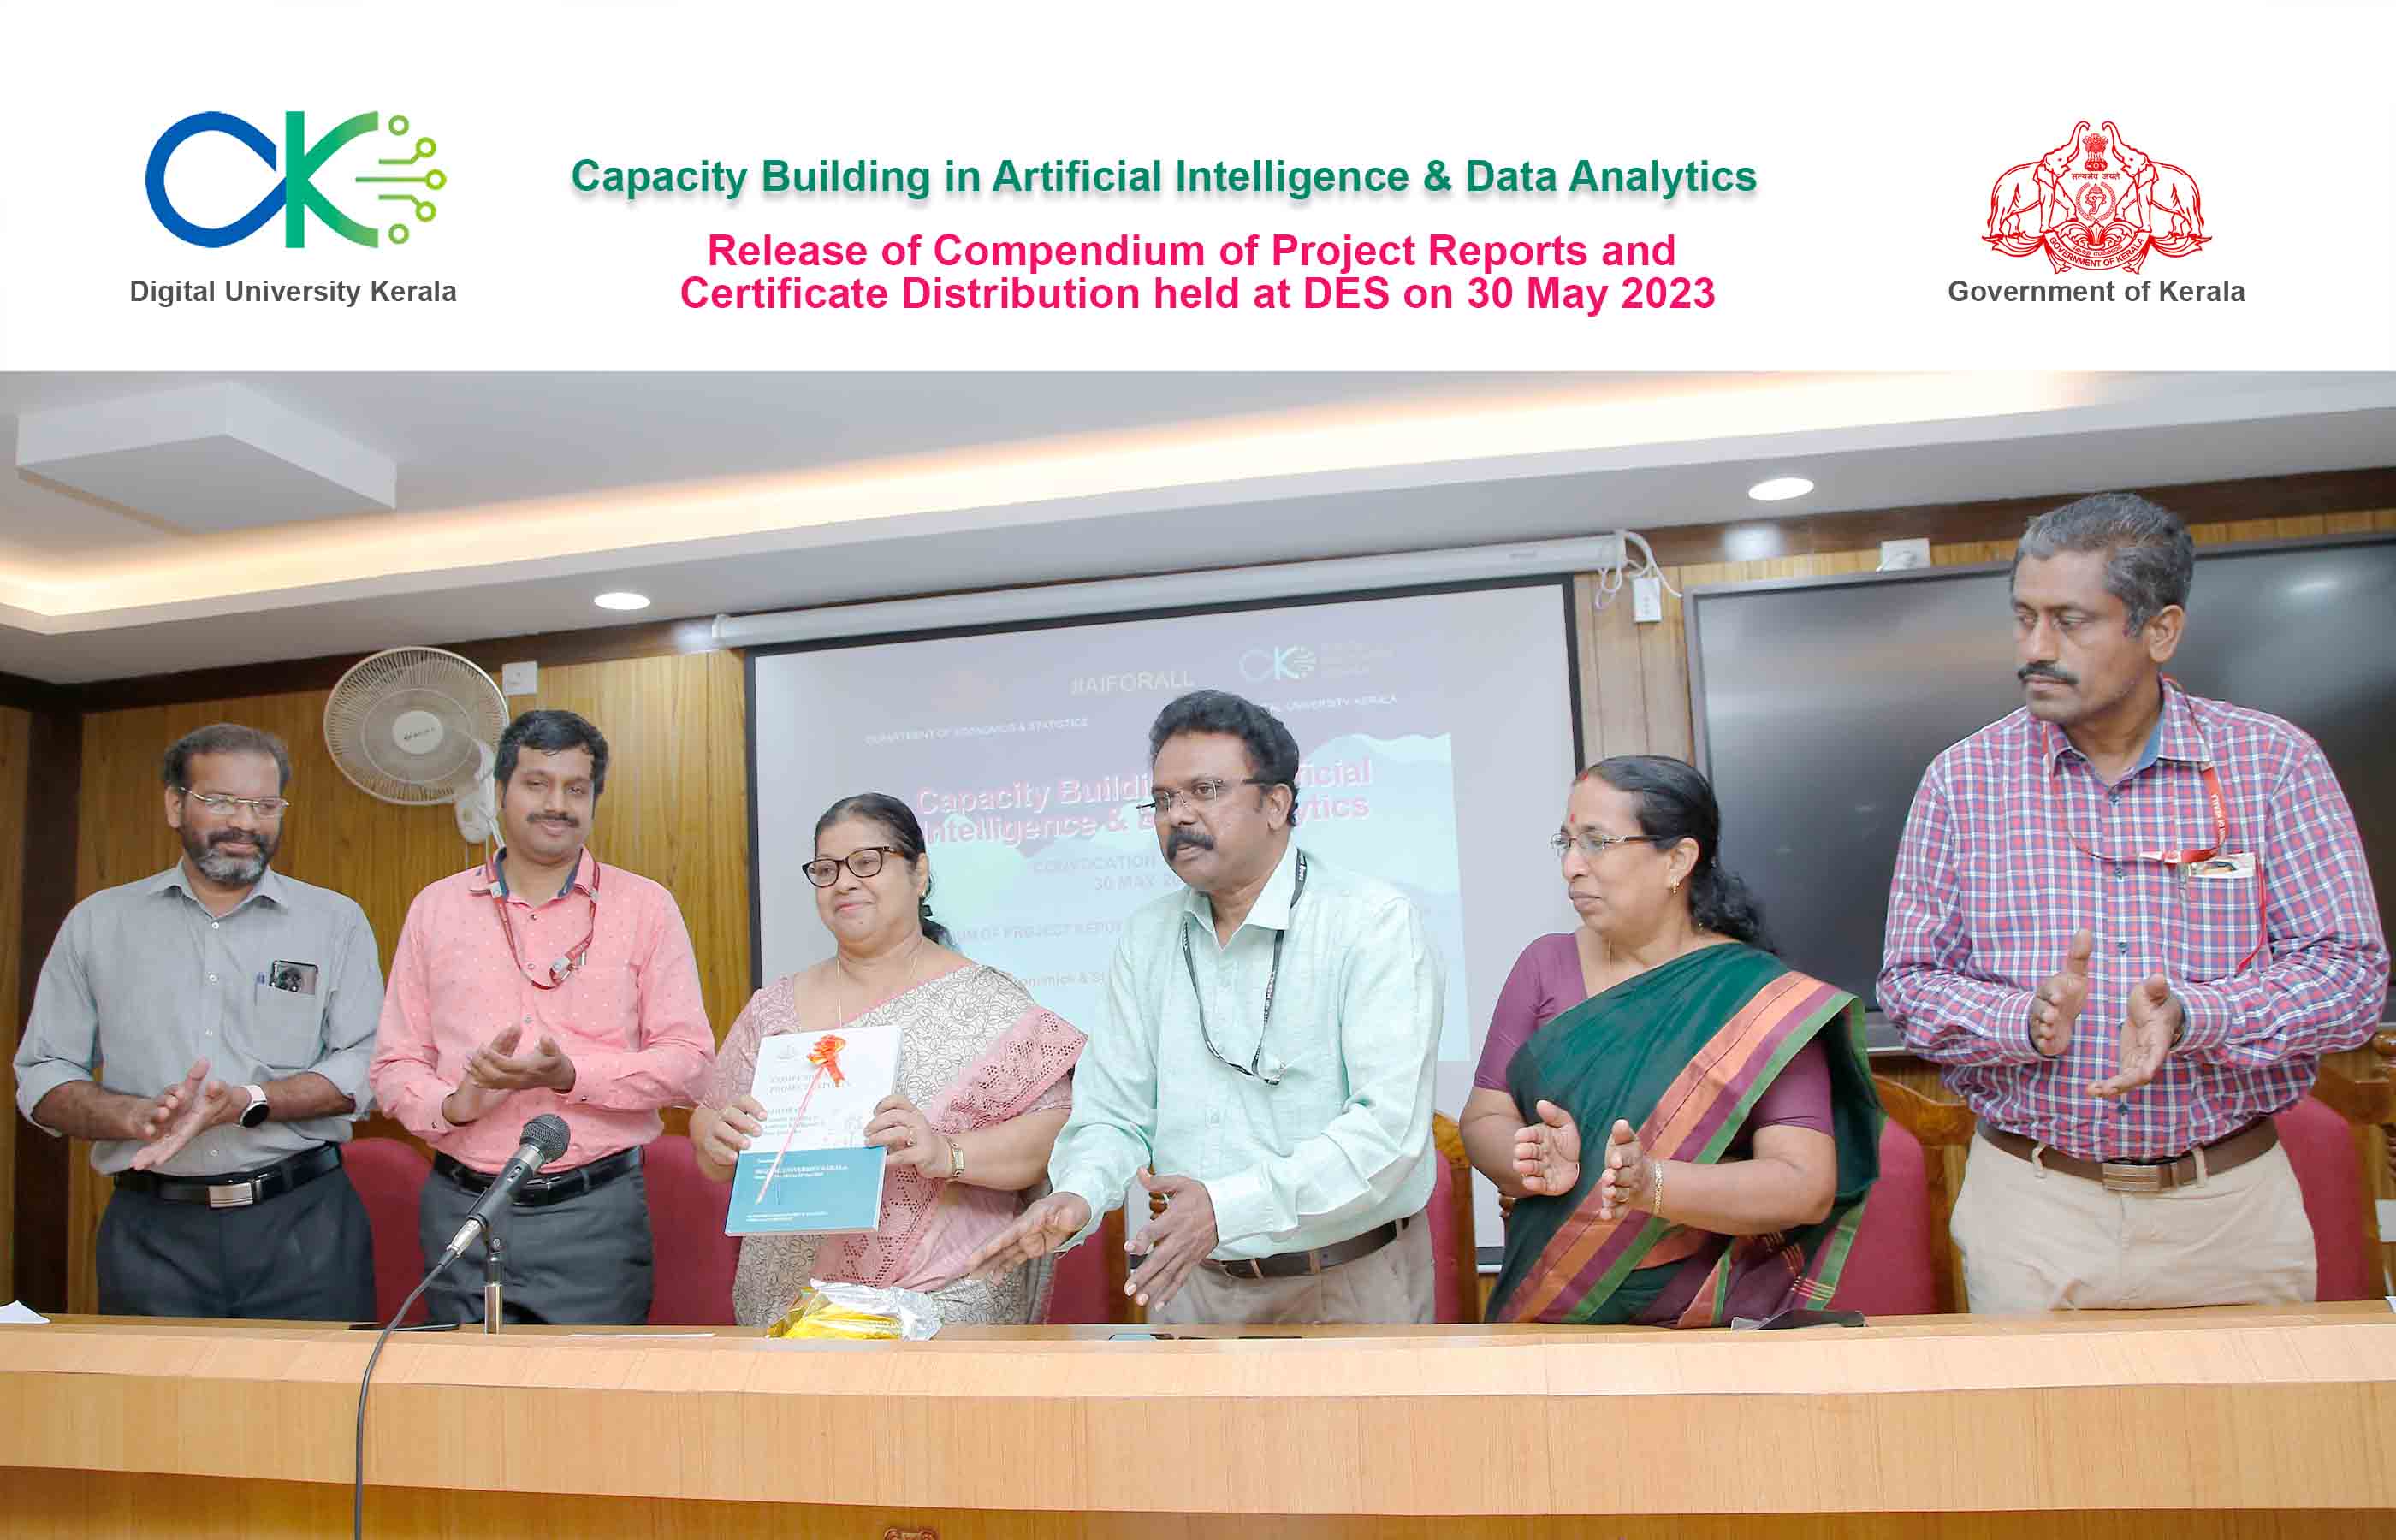 Release of Compendium of Project Reports by Dr. Elizabeth Sherly, Distingushed Professor DUK on 30-05-2023